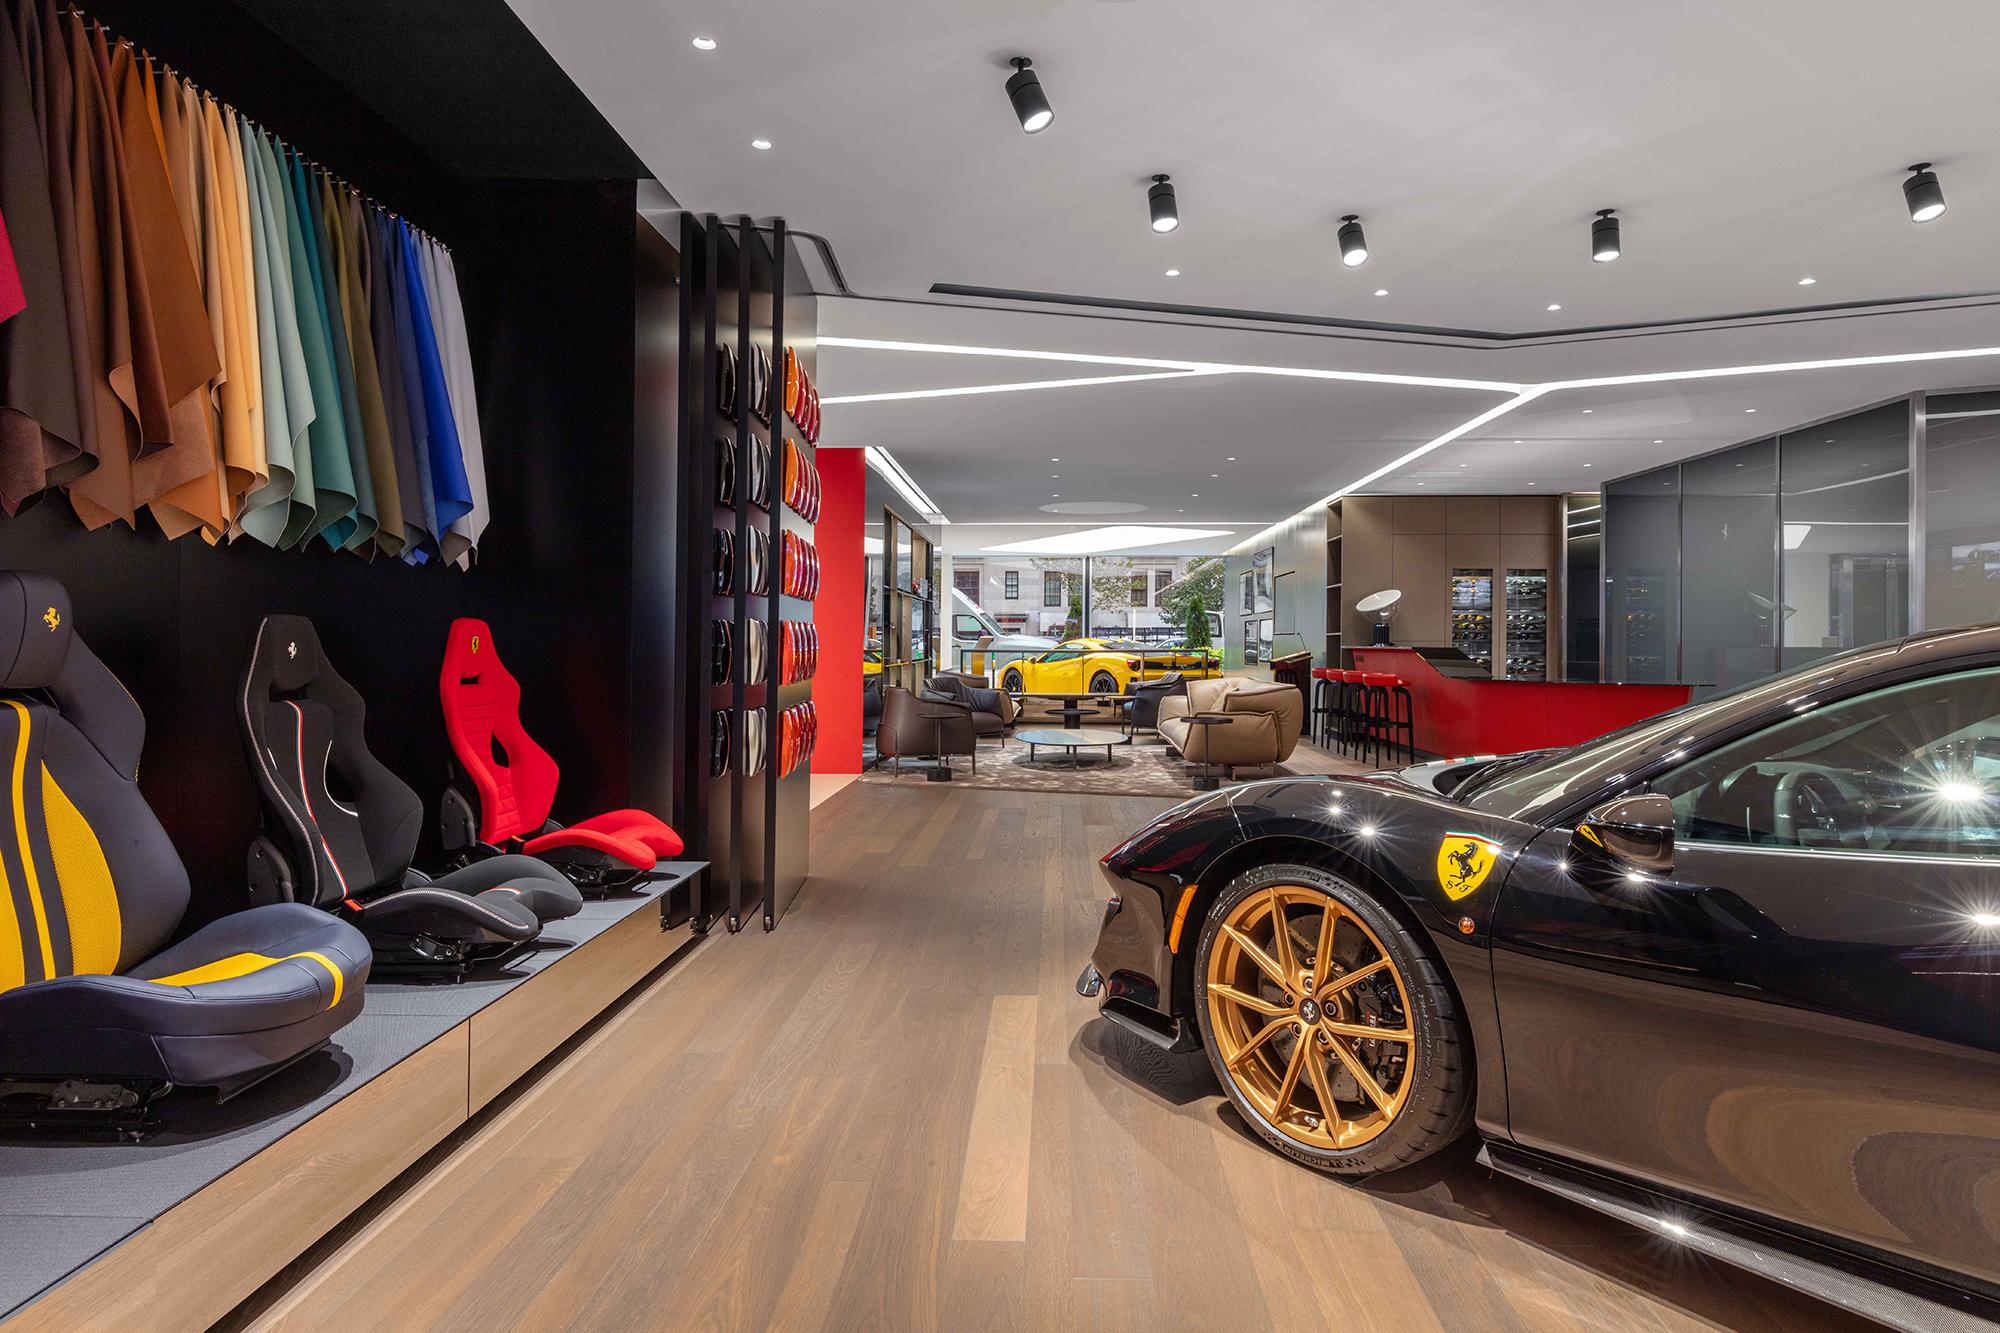 View the Ferrari Showroom Project Completed in New York